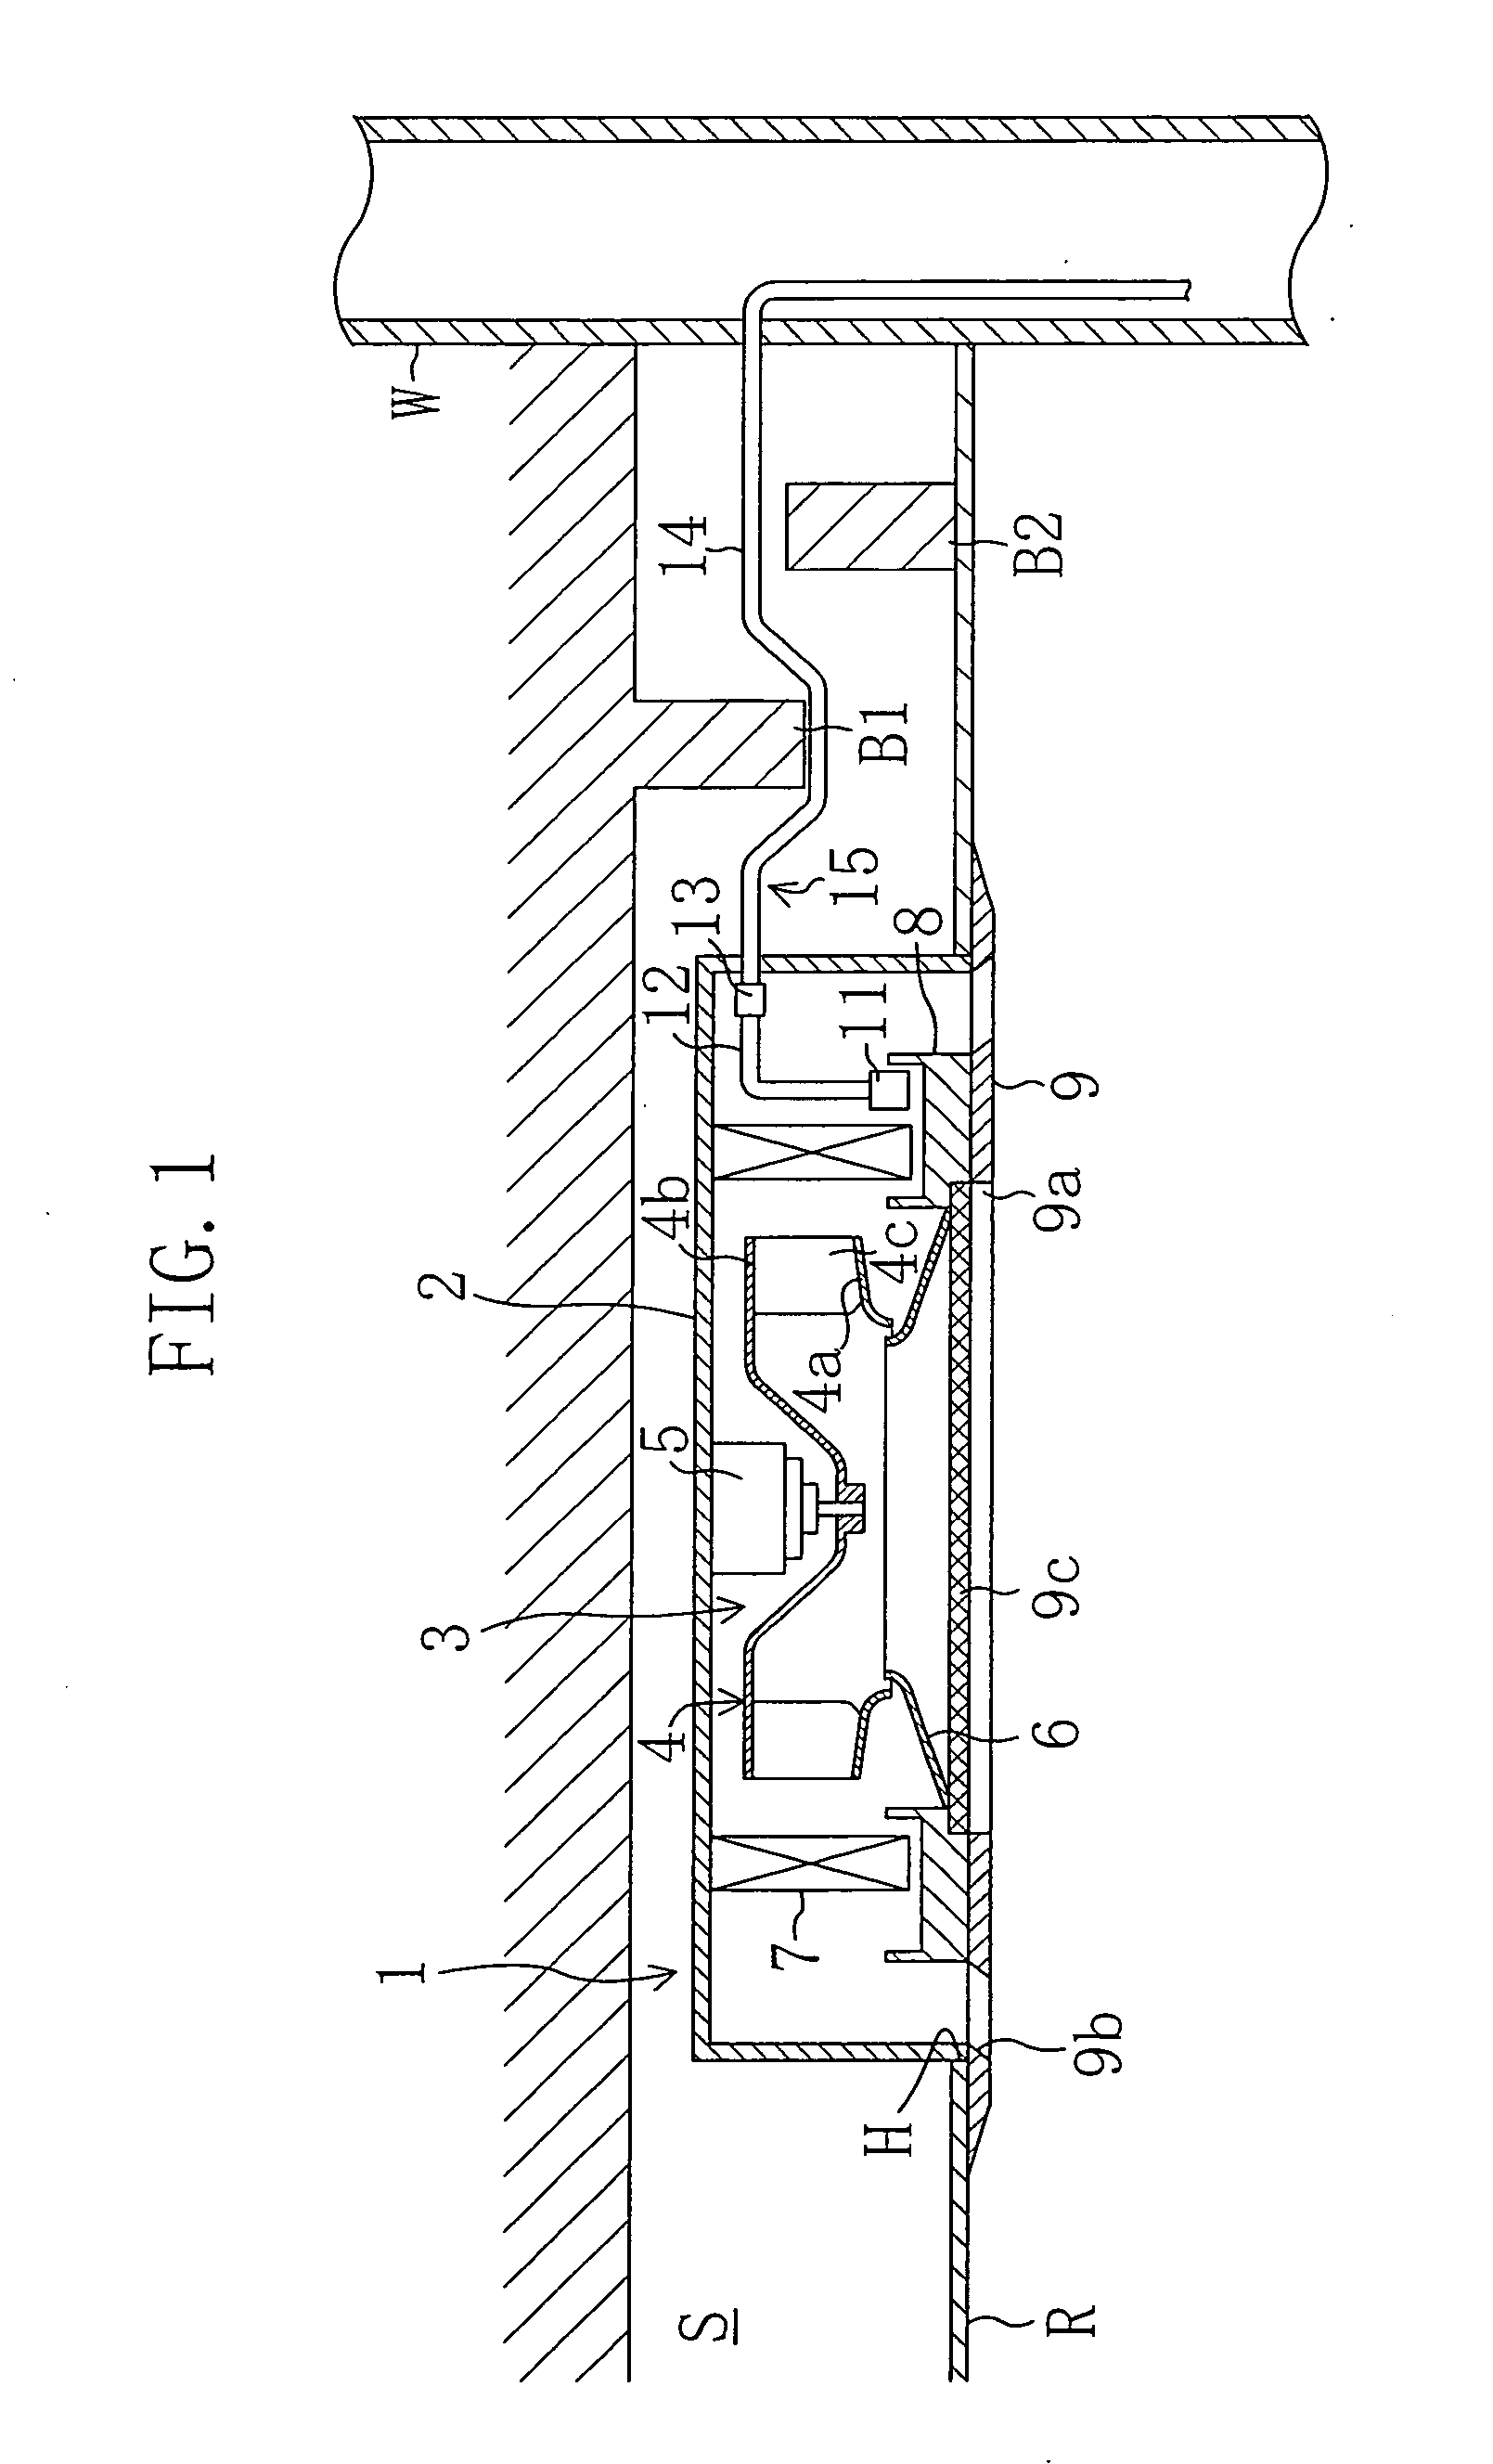 Drain water discharge structure for air conditioner